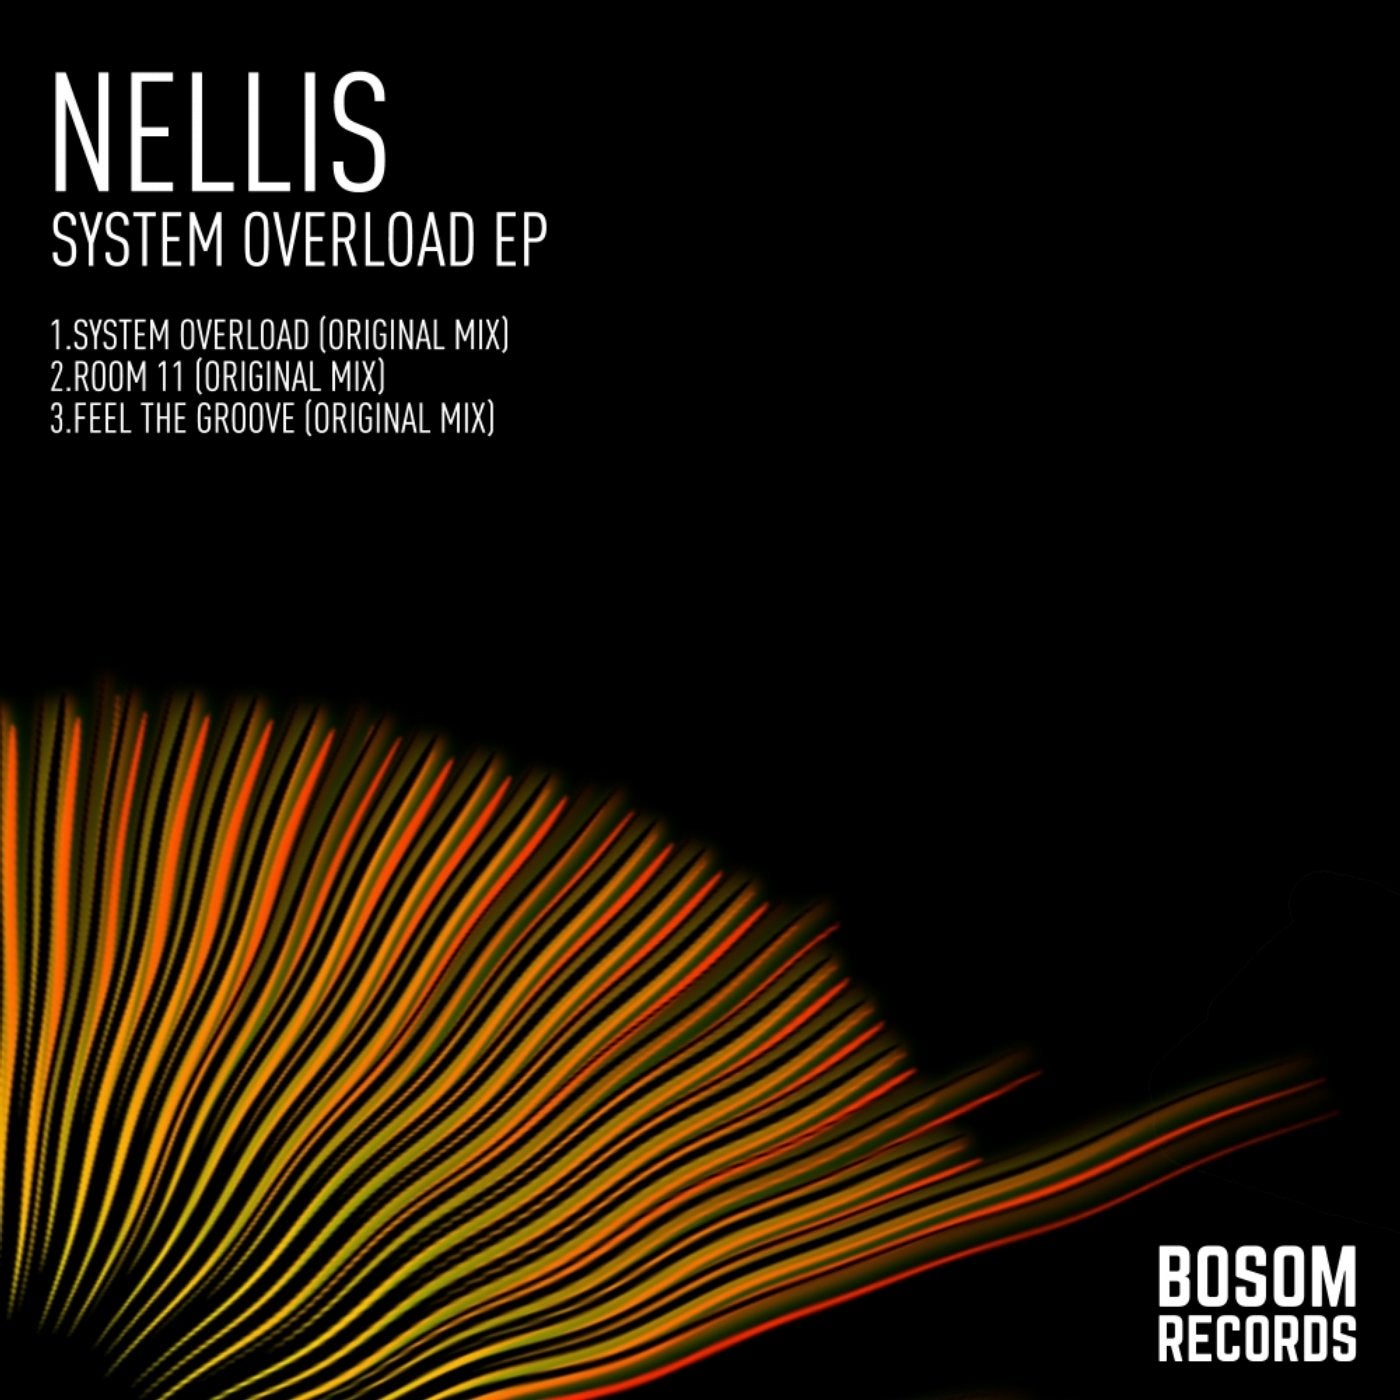 System Overload EP